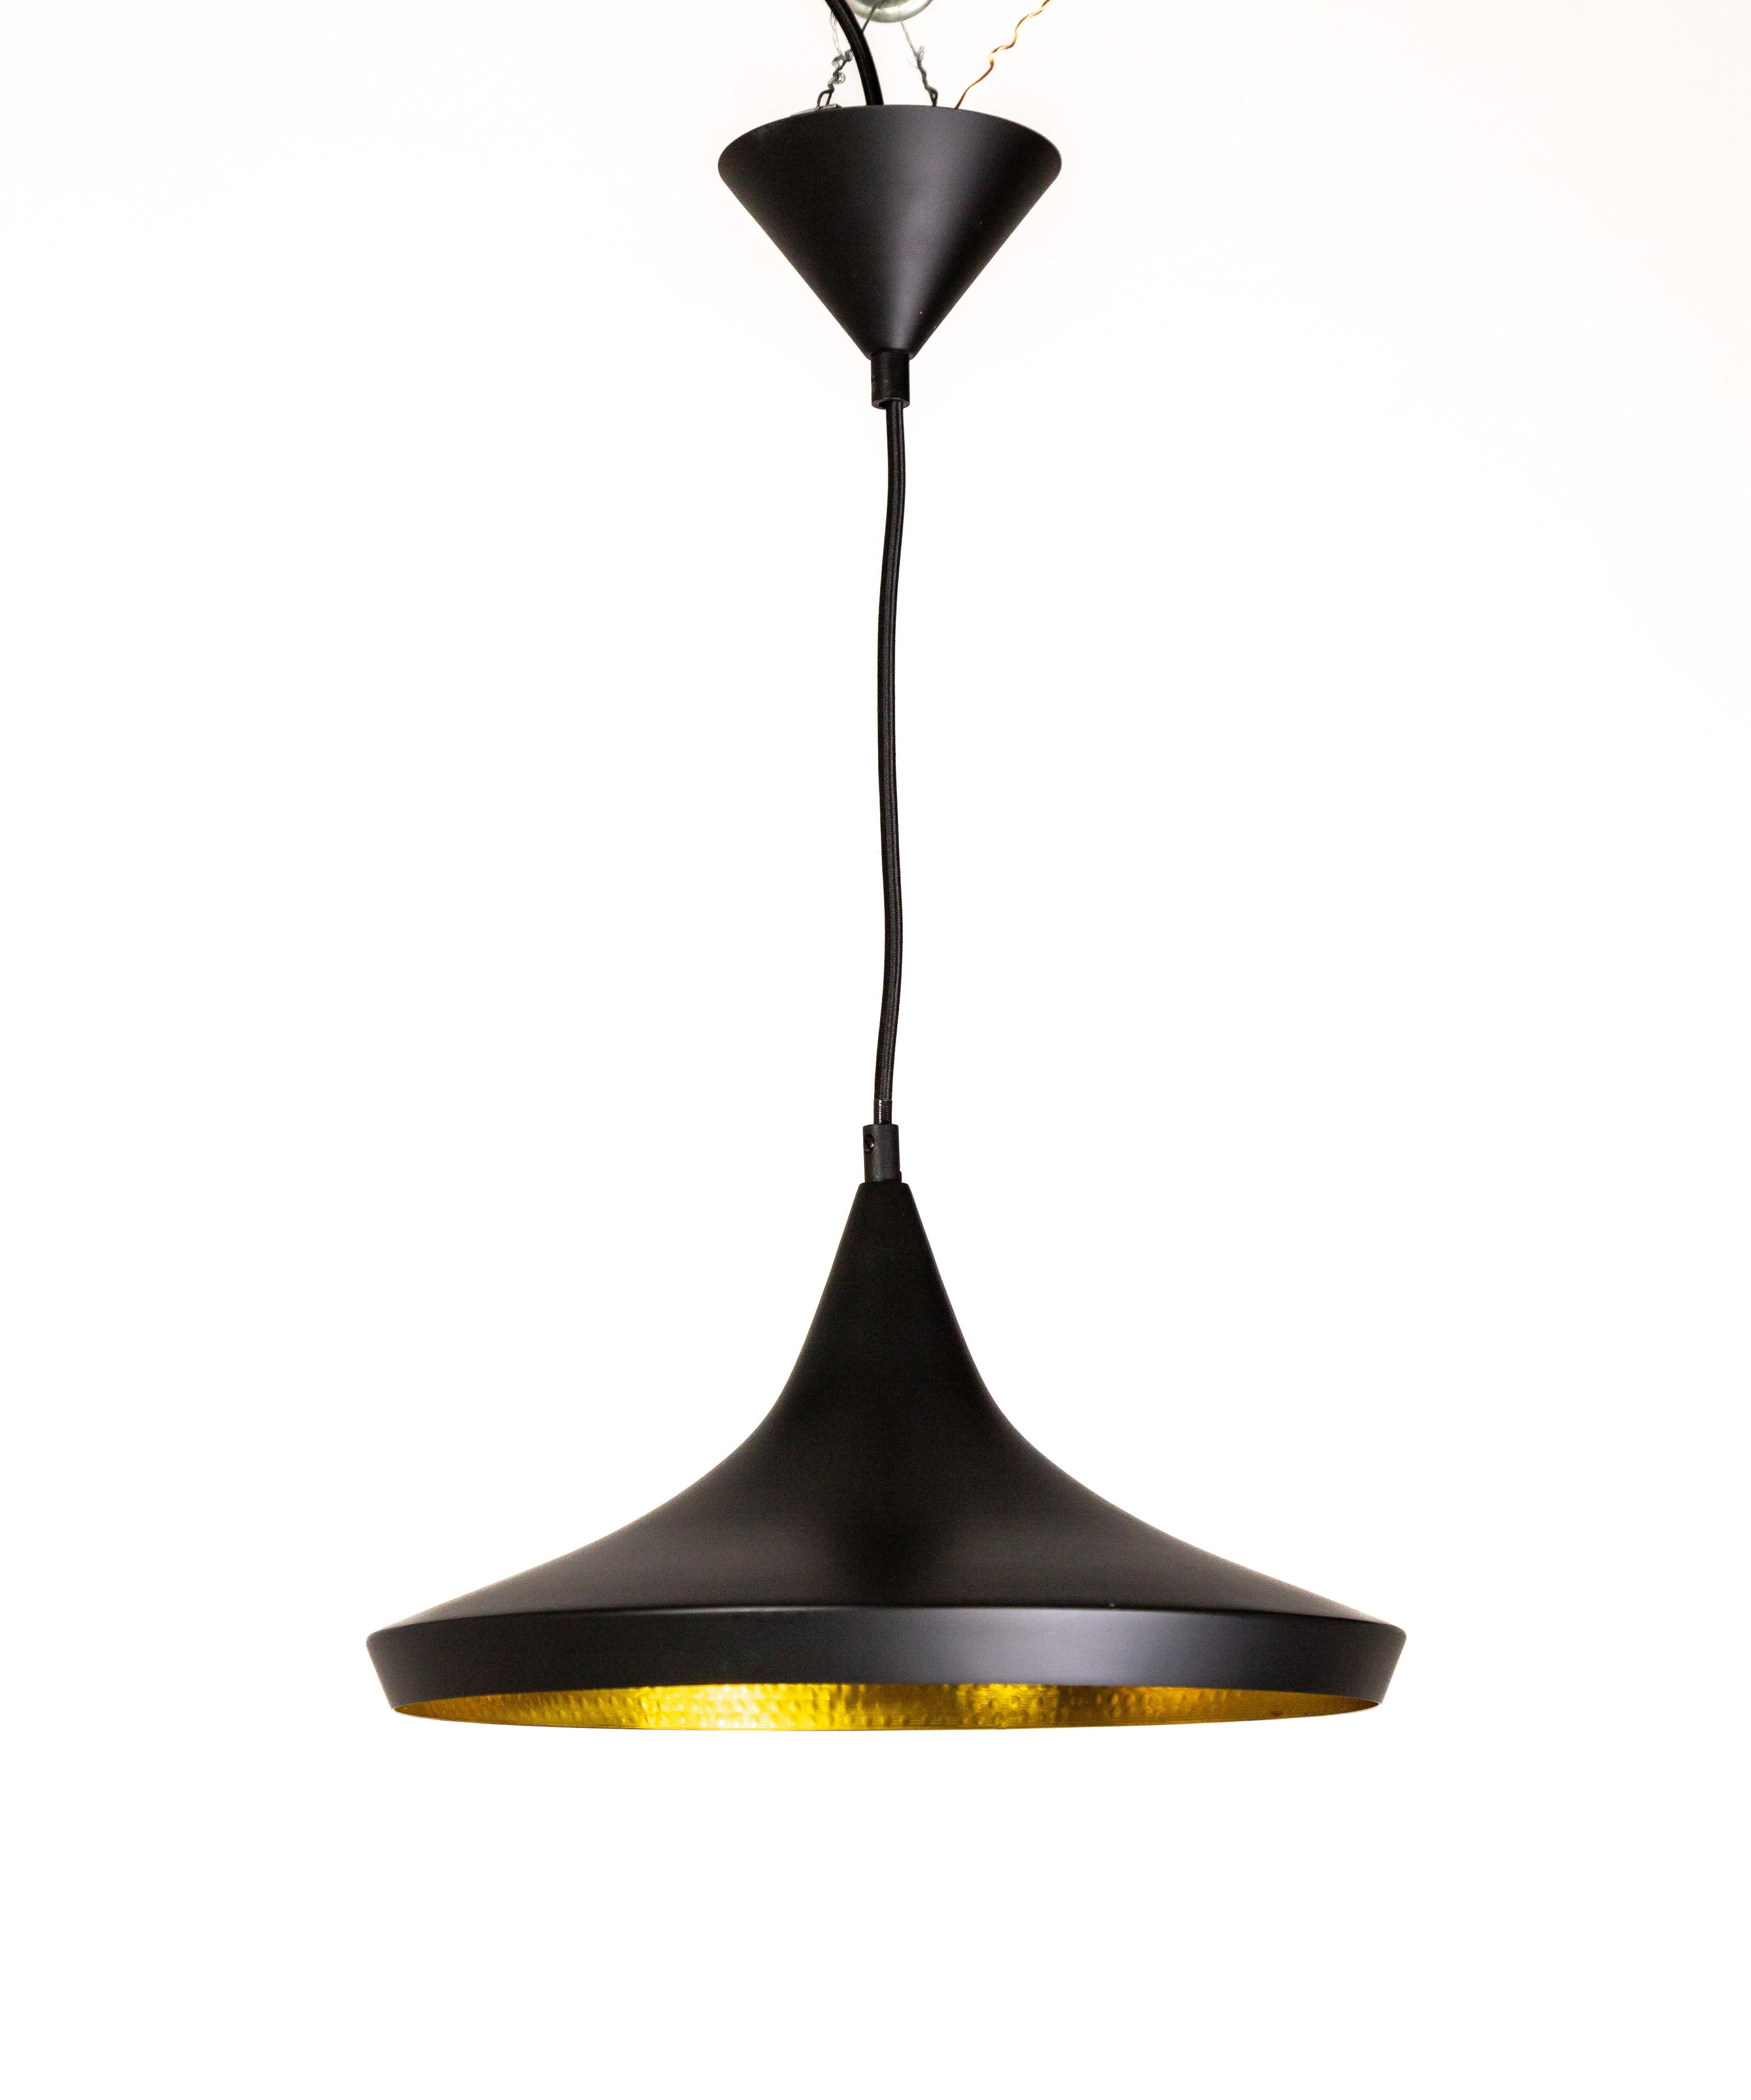 The contemporary Beat Fat pendant light, designed by Tom Dixon, is made of hand-spun brass in India. It is satin matte black with a shiny, gold textured interior that refracts and reflects light. With an integrated LED module and black fabric